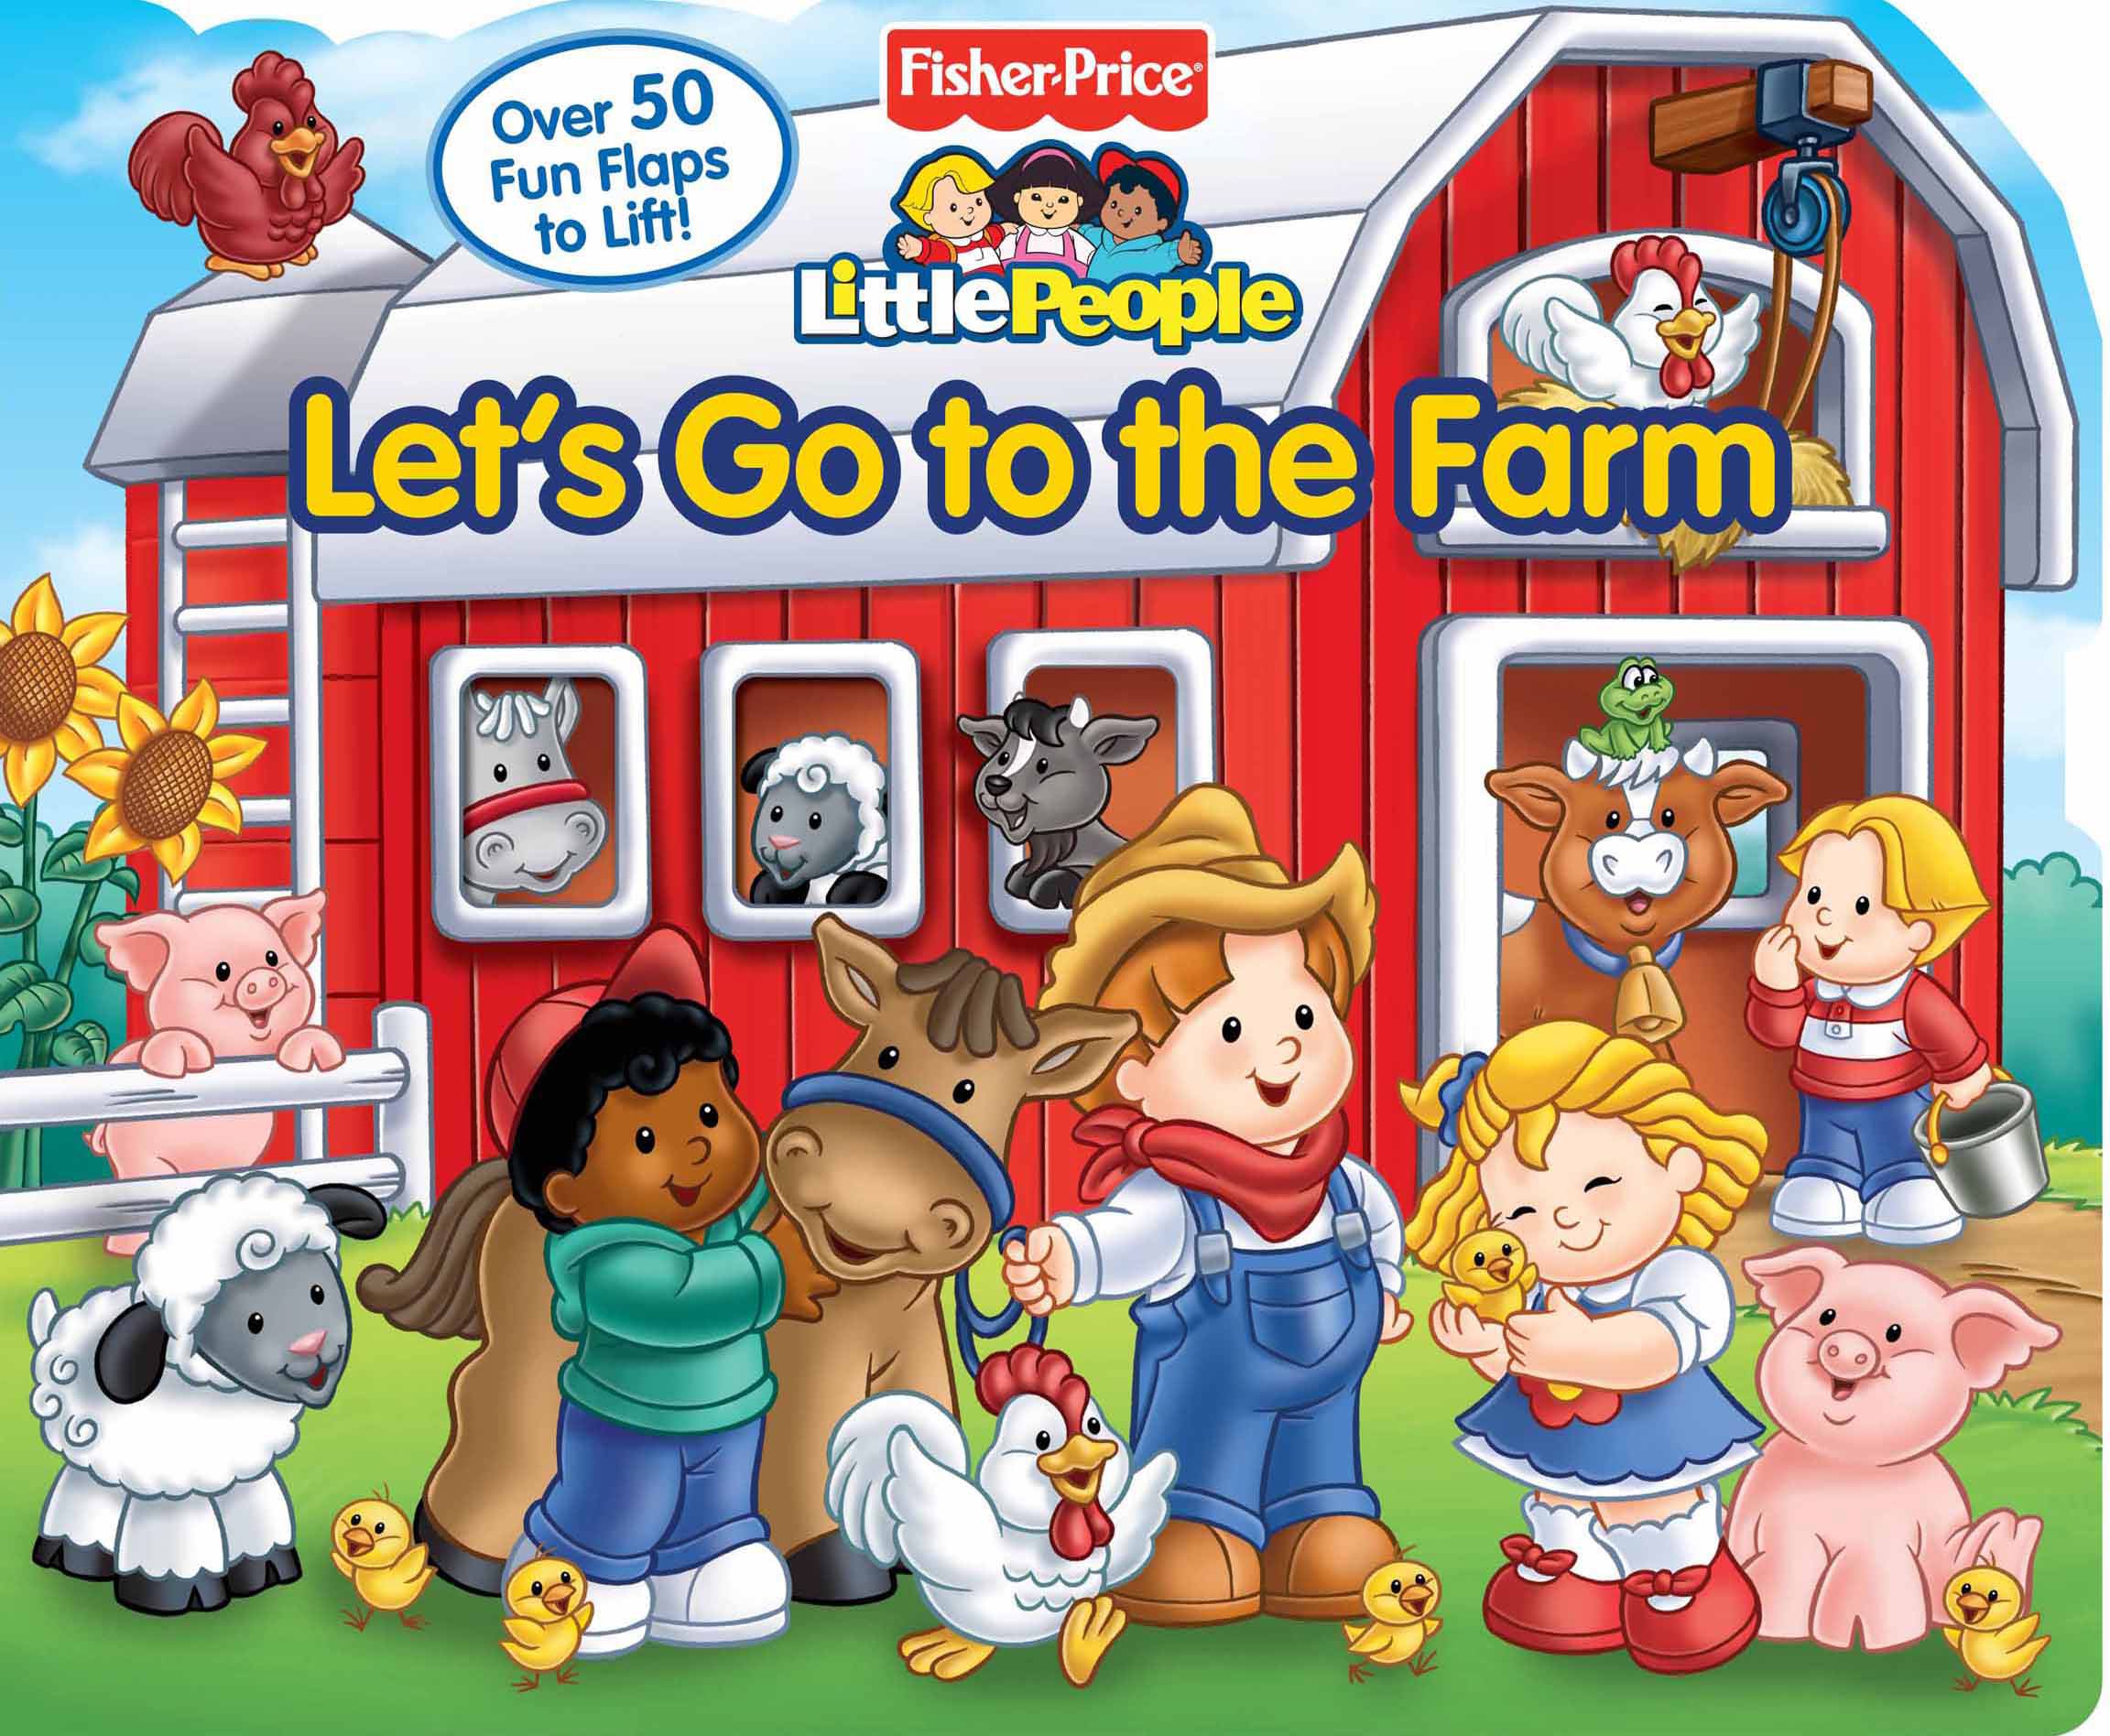 Fisher-Price Little People: Let's Go to the Farm (Board Book) - image 1 of 2